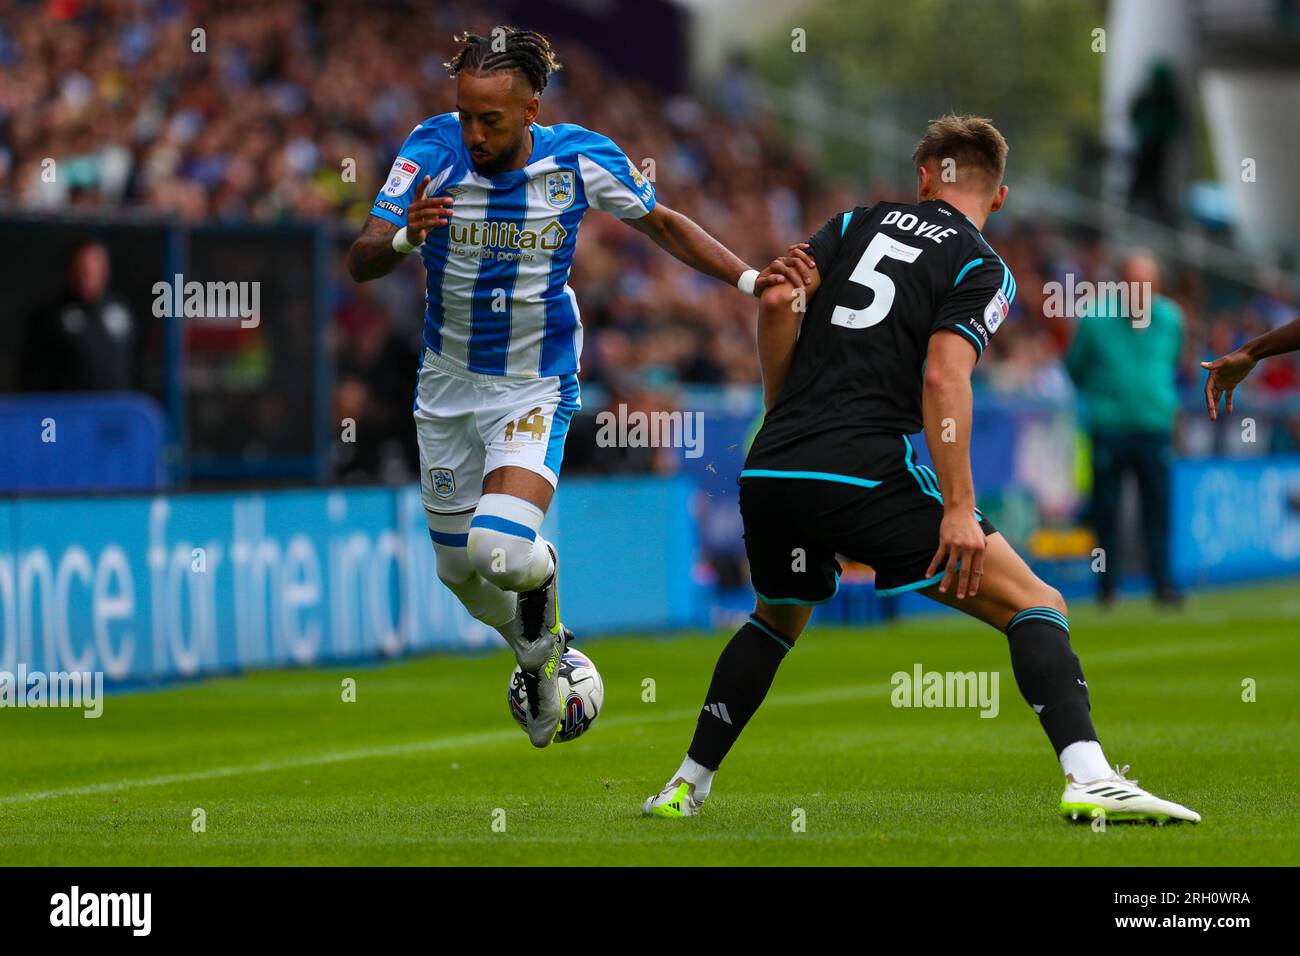 John Smith's Stadium, Huddersfield, England - 12th August 2023 Sorba Thomas (14) of Huddersfield Town is tackled by Callum Doyle (5) of Leicester City - during the game Huddersfield Town v Leicester City, Sky Bet Championship,  2023/24, John Smith's Stadium, Huddersfield, England - 12th August 2023 Credit: Mathew Marsden/WhiteRosePhotos/Alamy Live News Stock Photo